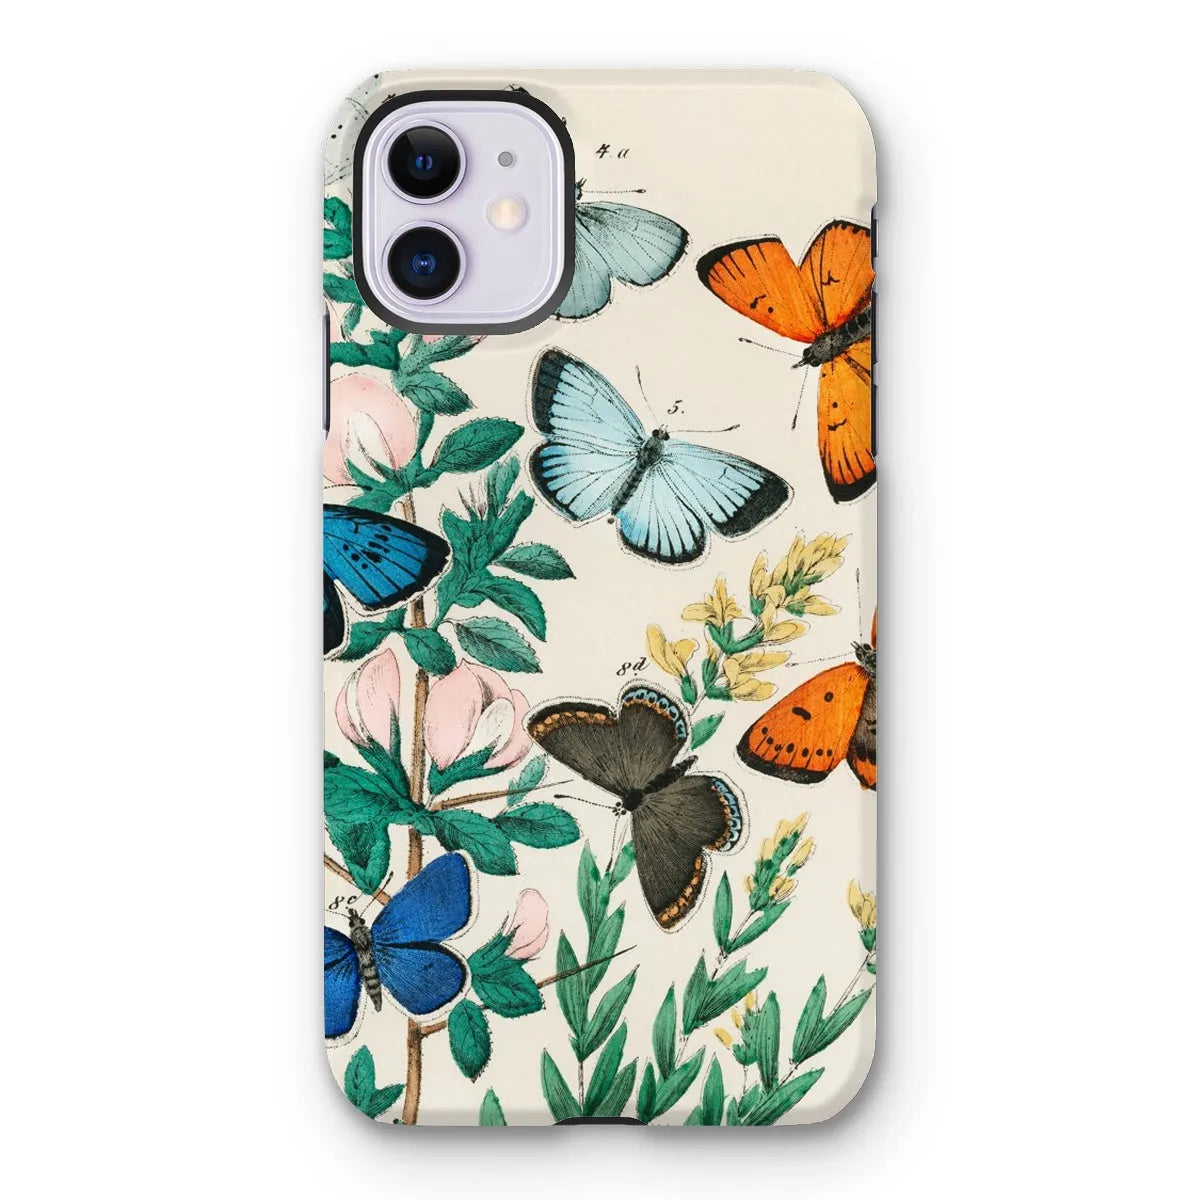 Another Butterfly Aesthetic Art Phone Case - William Forsell Kirby - Iphone 11 / Matte - Mobile Phone Cases - Aesthetic